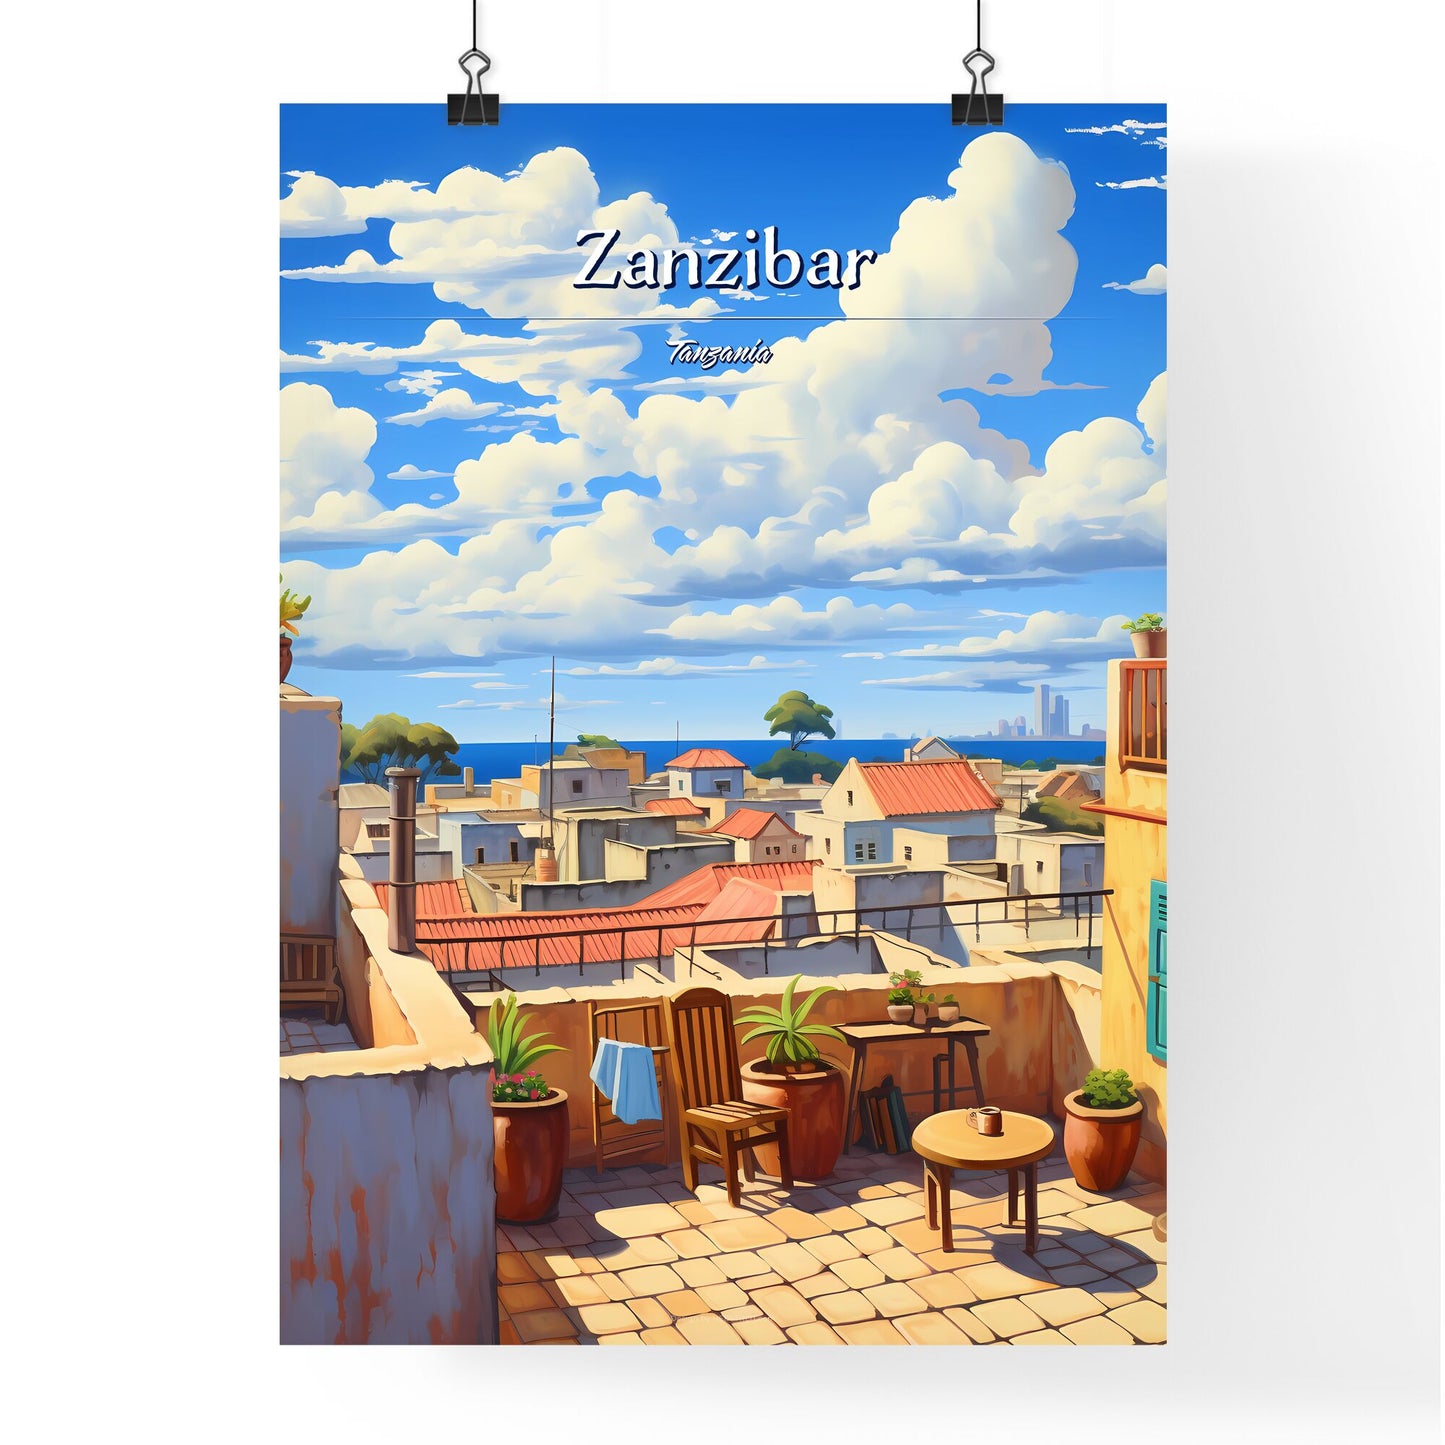 On the roofs of Zanzibar, Tanzania - Art print of a rooftop view of a town with a view of the ocean Default Title